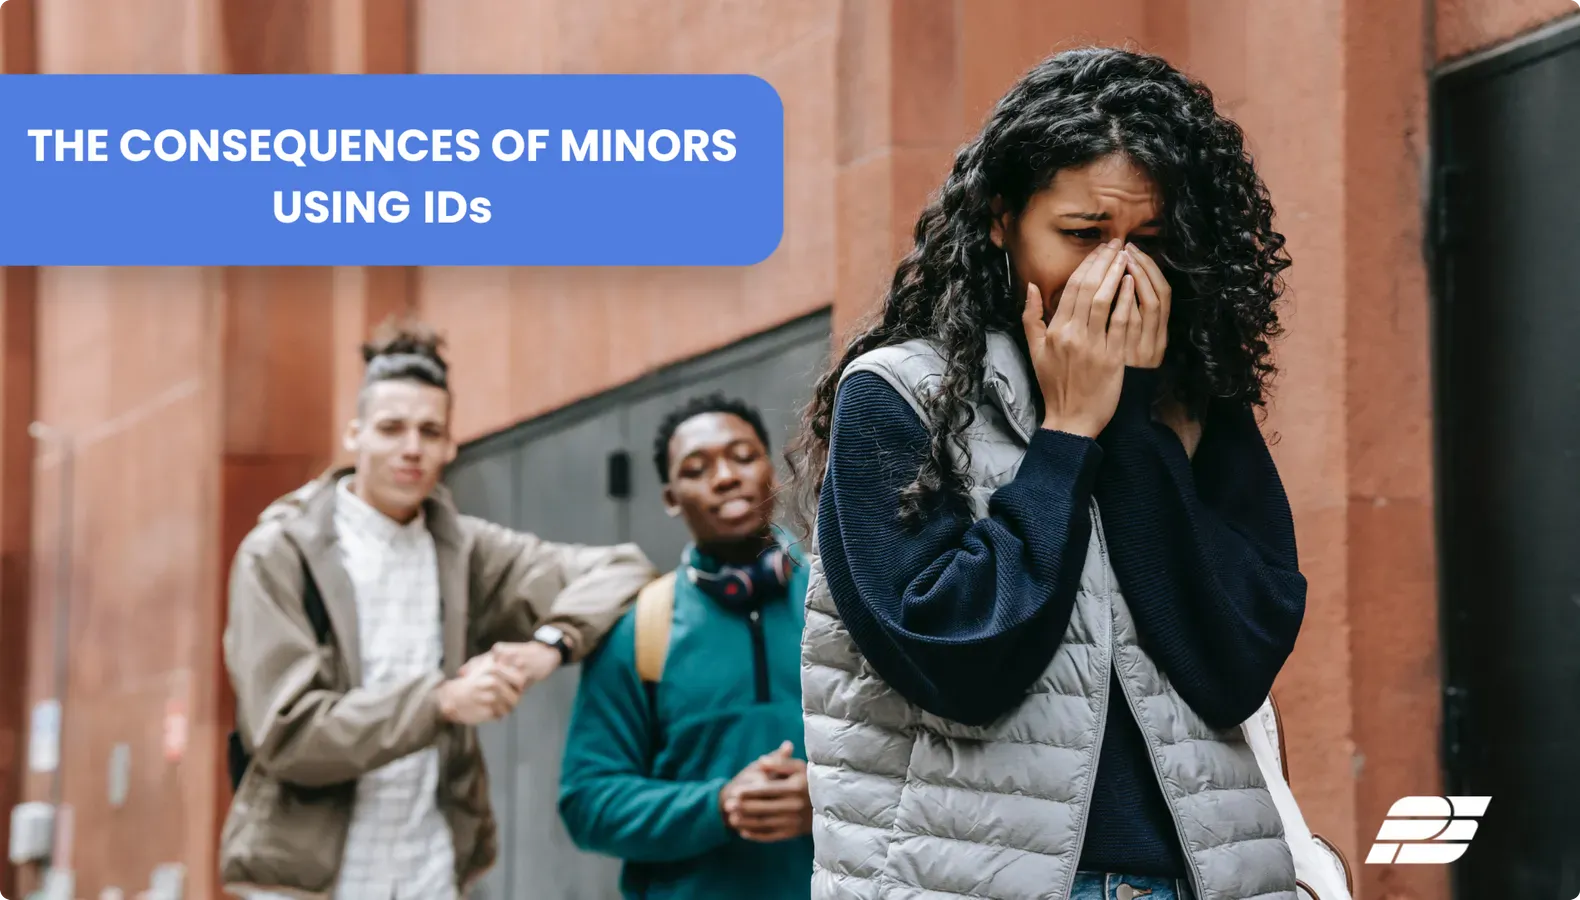 The consequences of minors using IDs